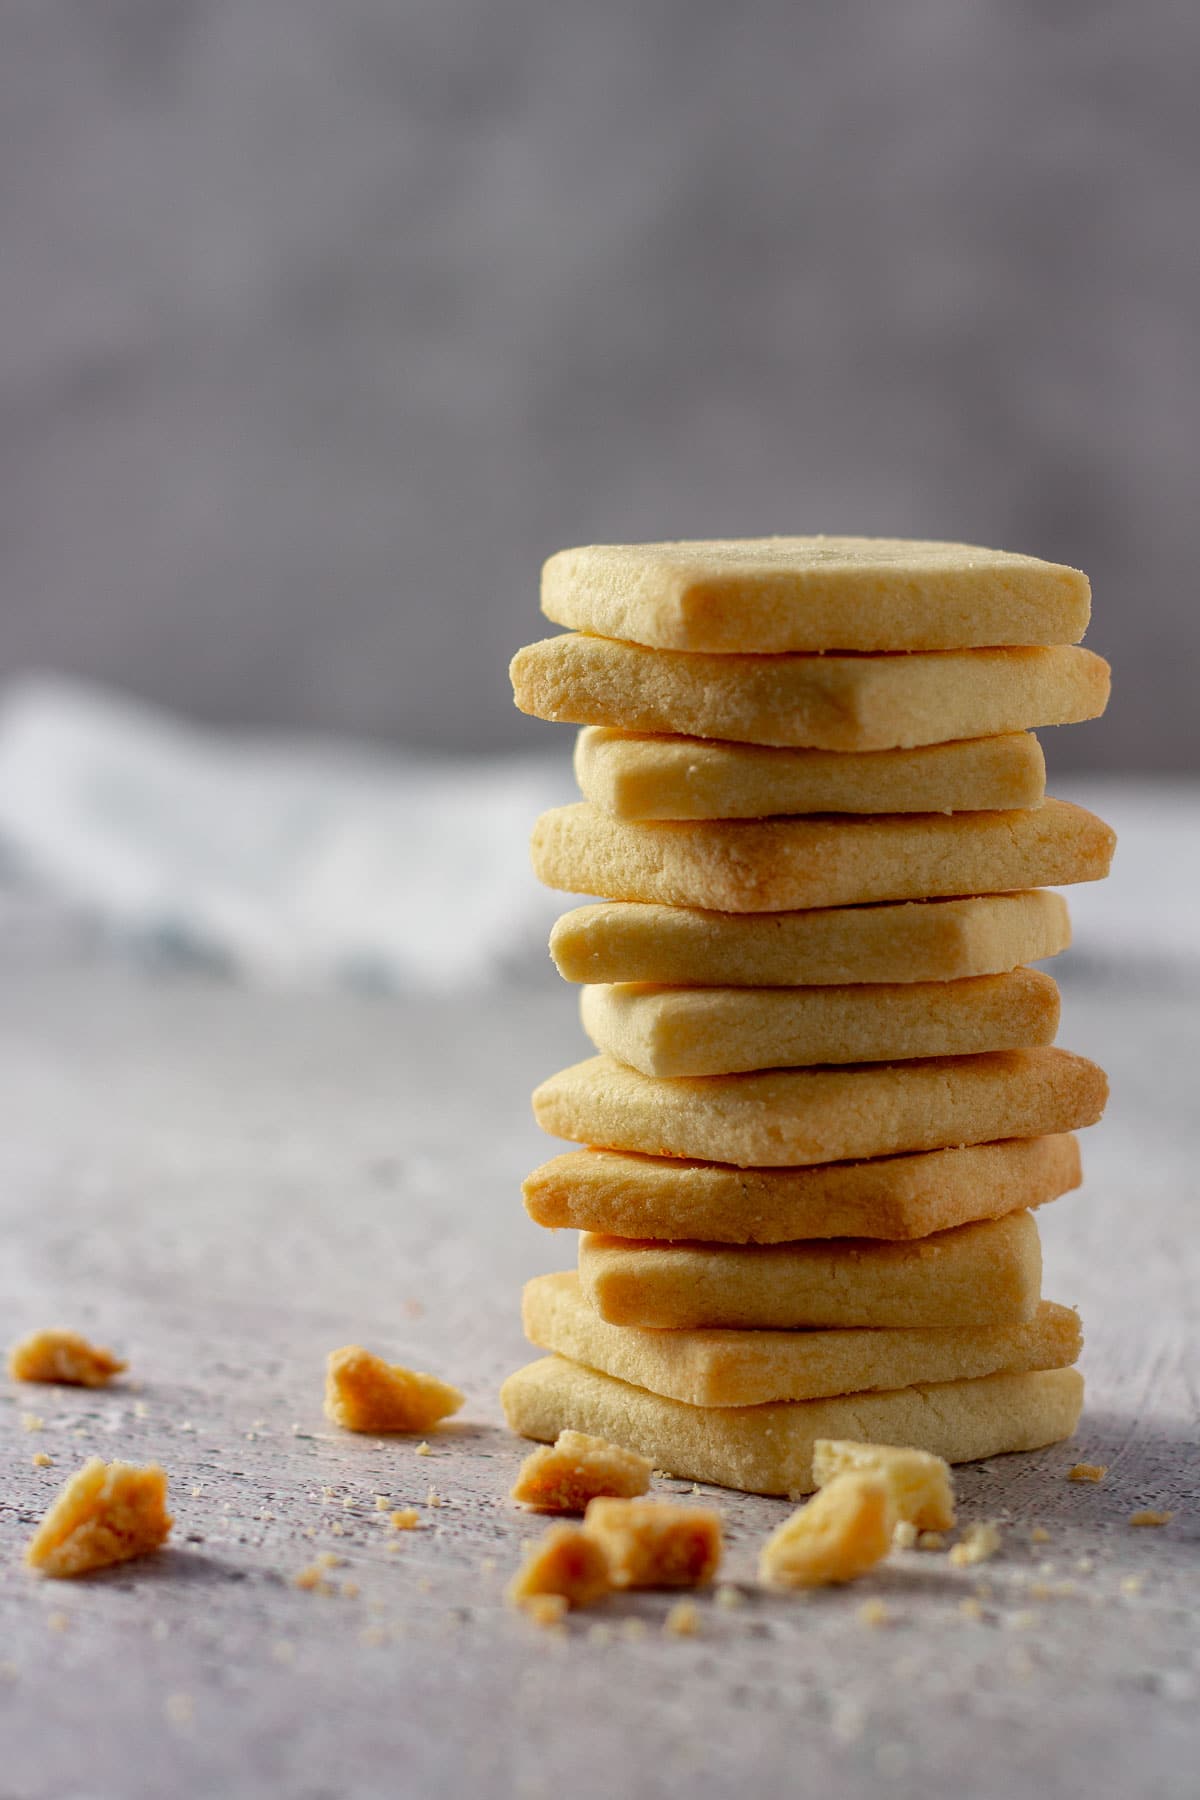 Stacked of Eet-Som-Mor Whipped Shortbread biscuits.